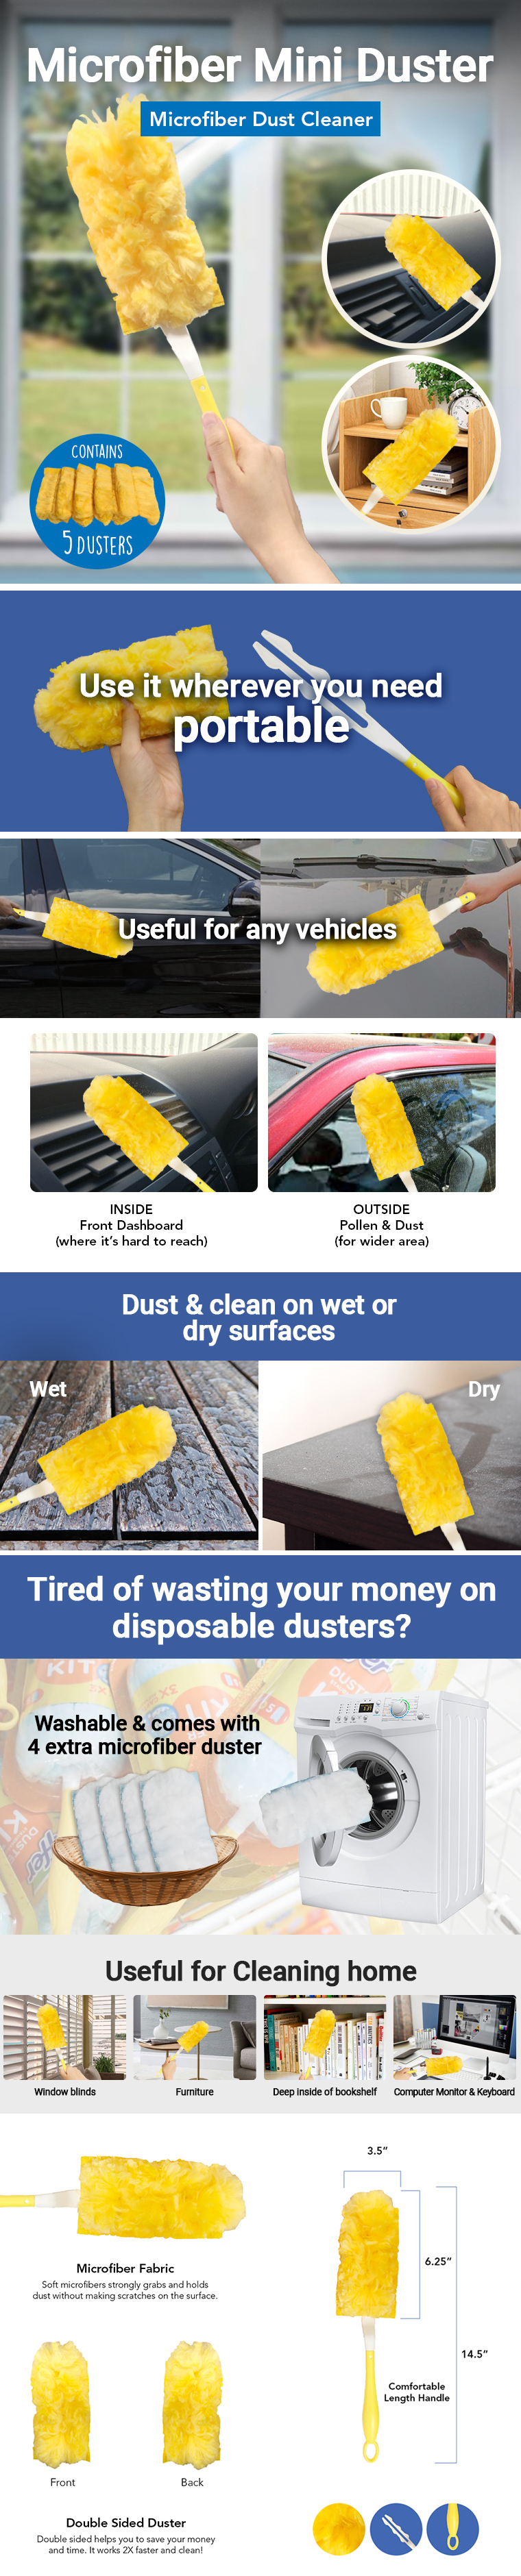 Detailer's Preference Mini Microfiber Car Duster with Spade Head – Eurow